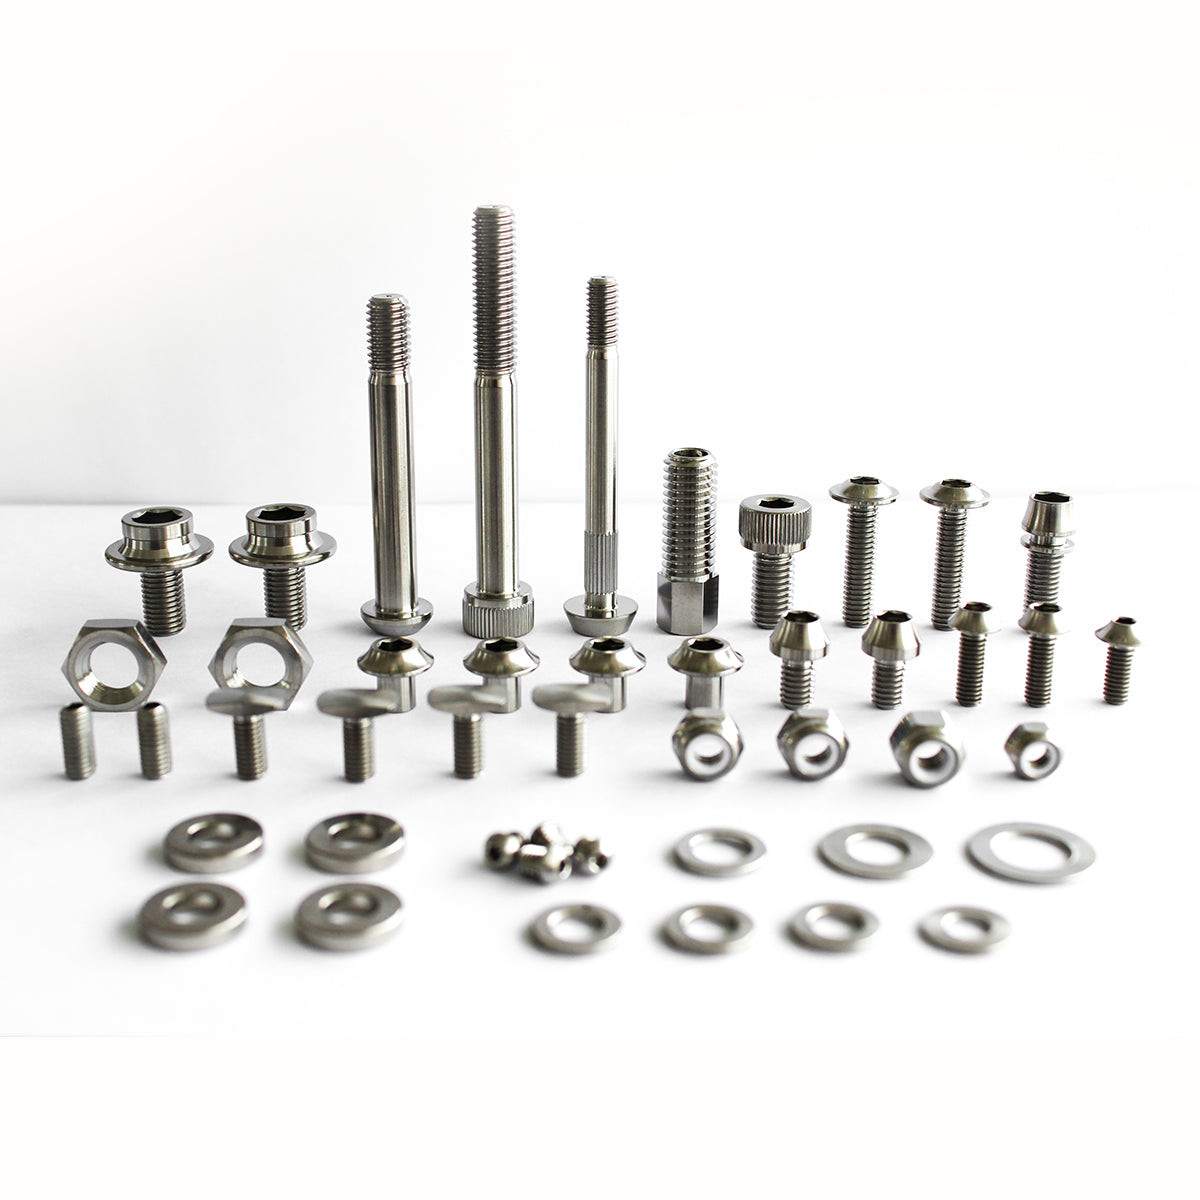 Titanium fasteners (bolts screws nuts washers) set suit for